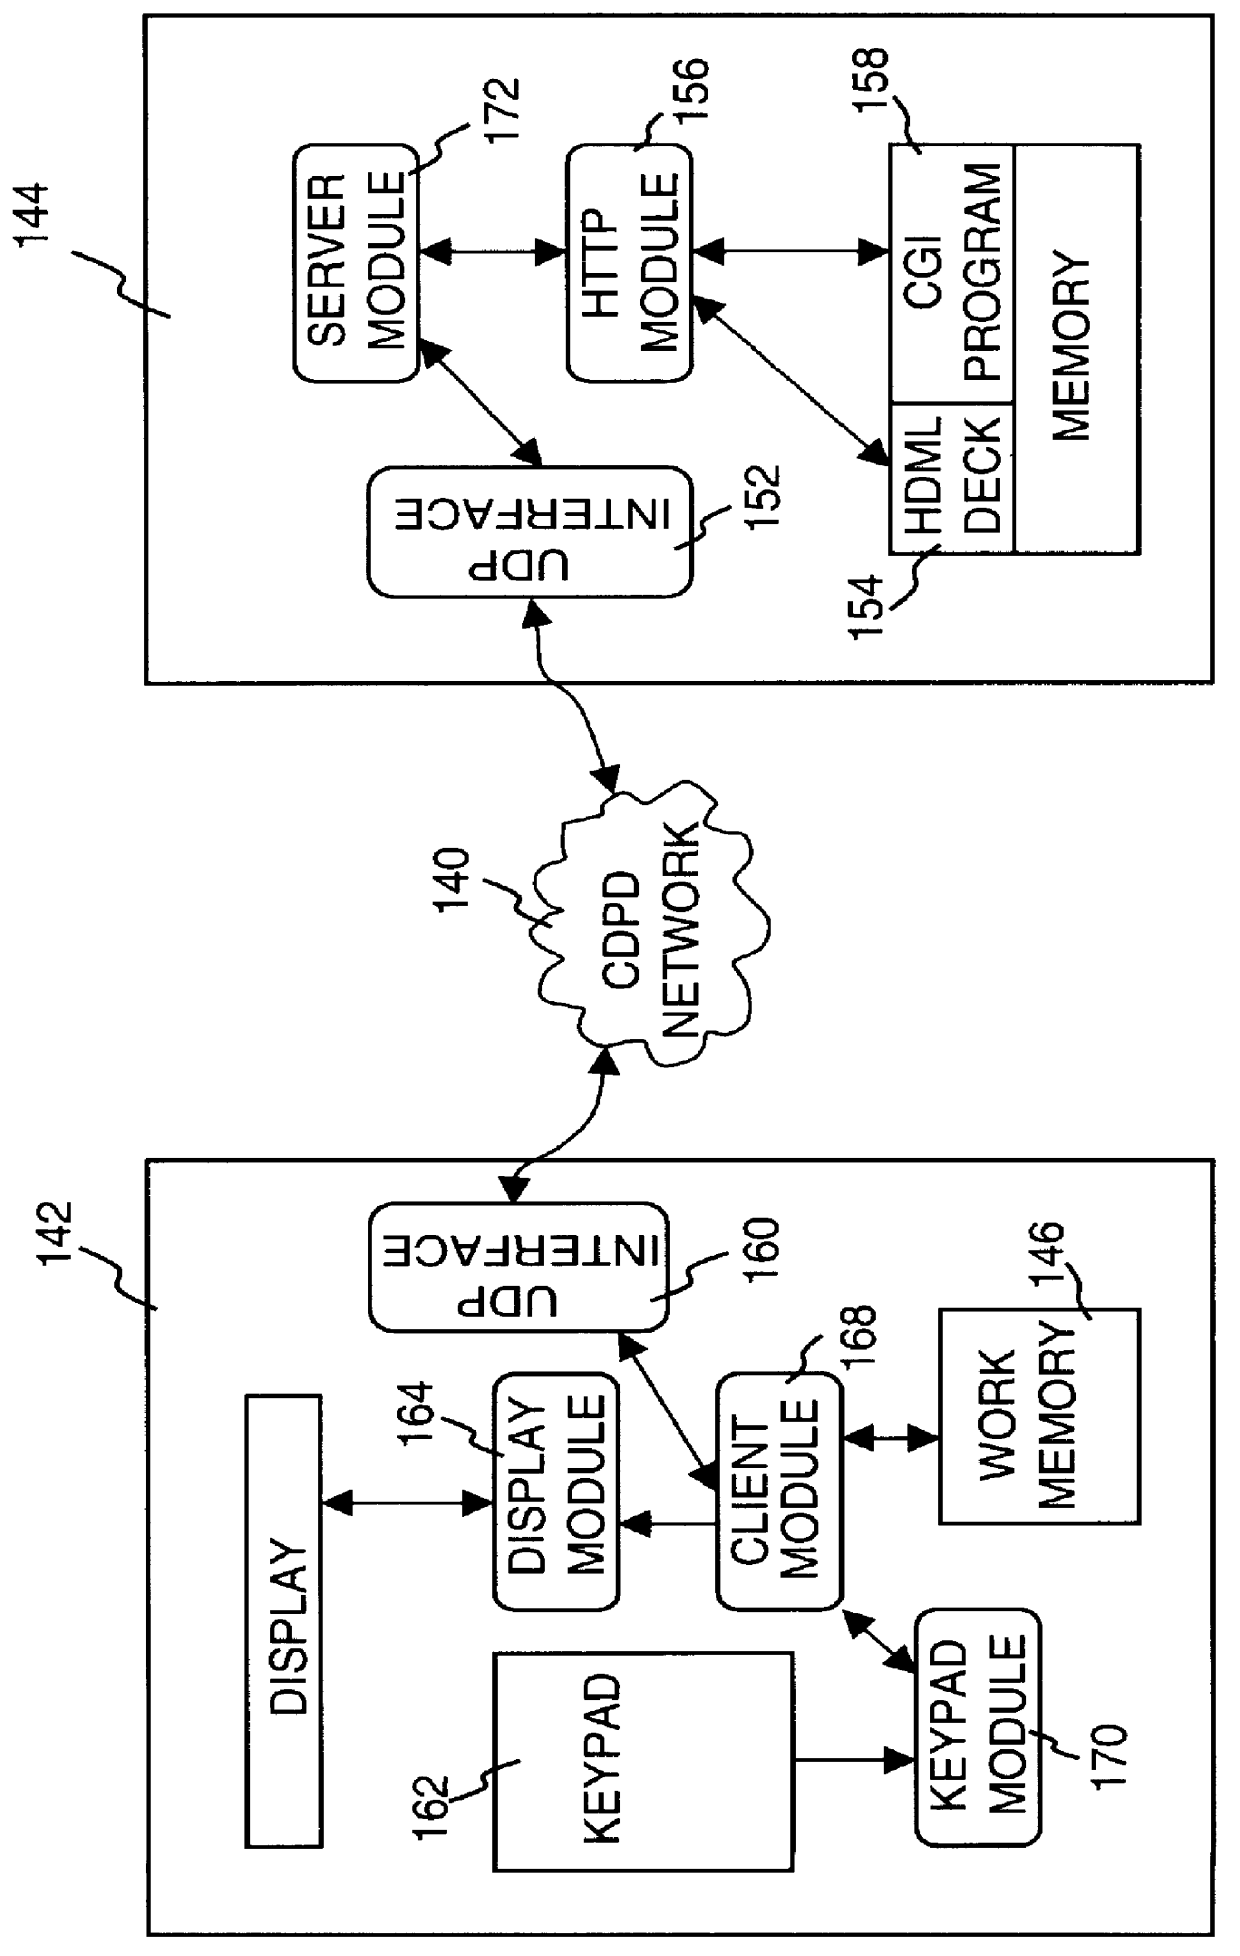 Method and apparatus for accelerating navigation of hypertext pages using compound requests